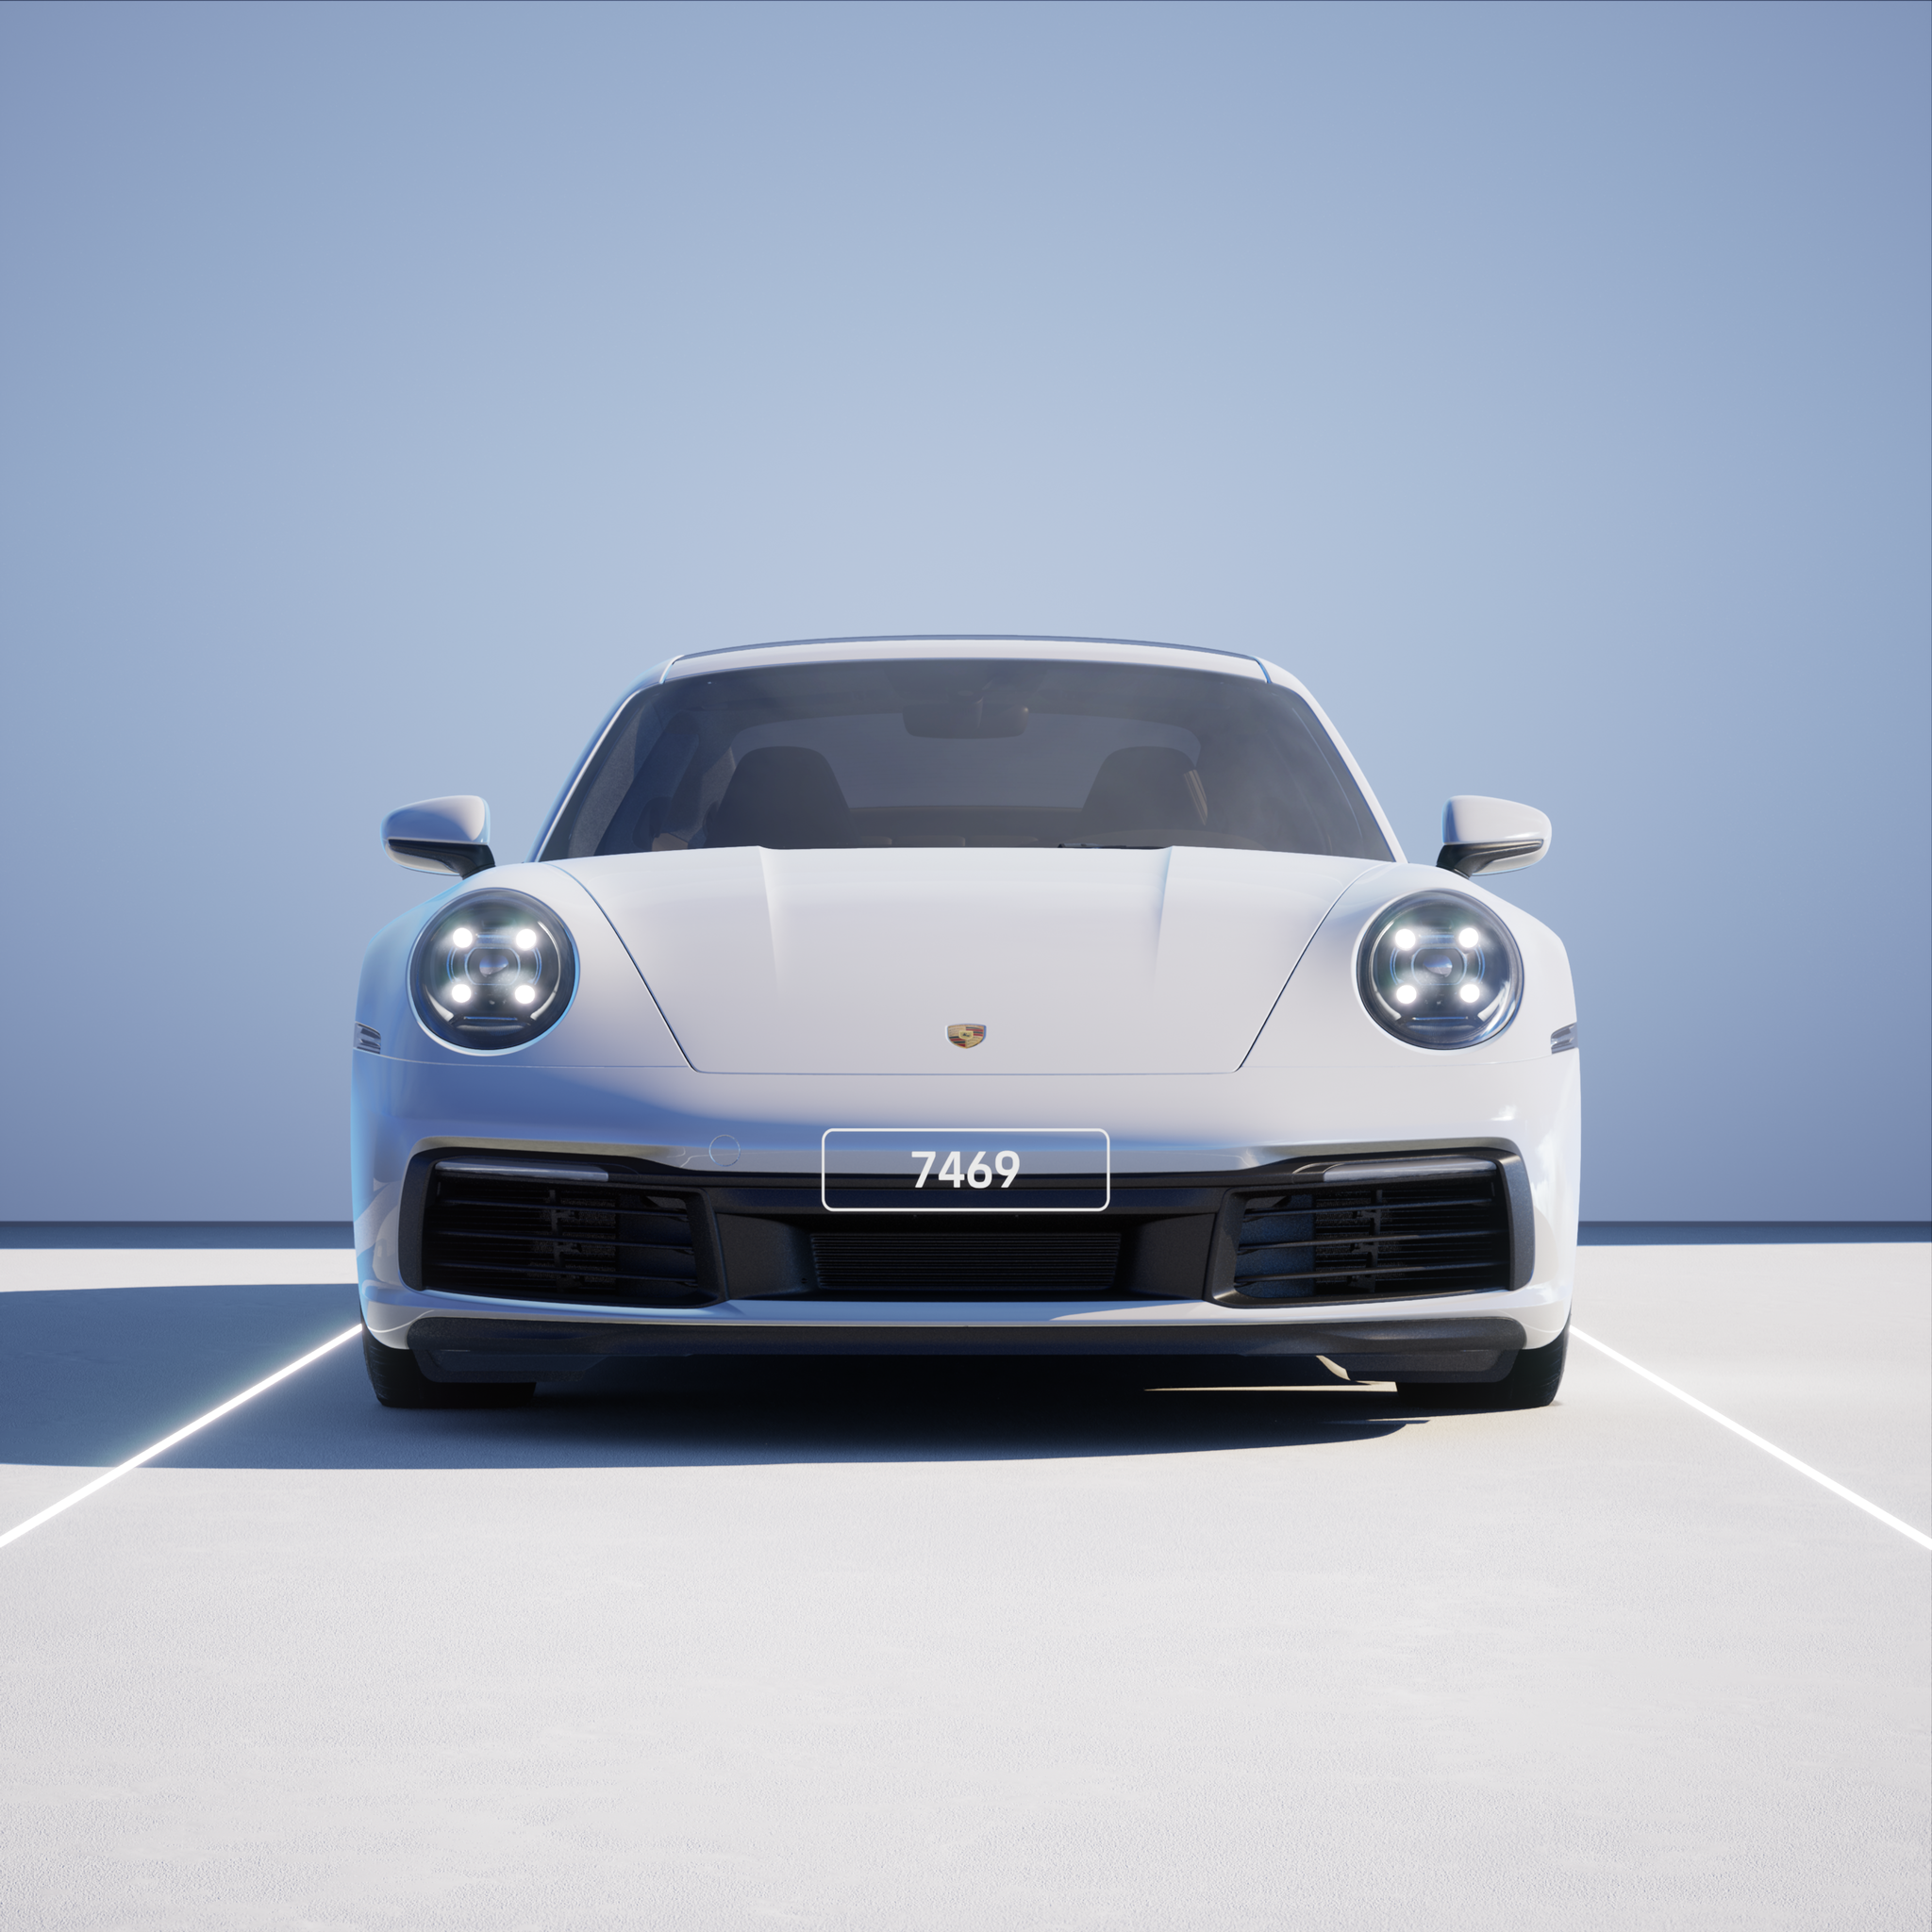 The PORSCHΞ 911 7469 image in phase